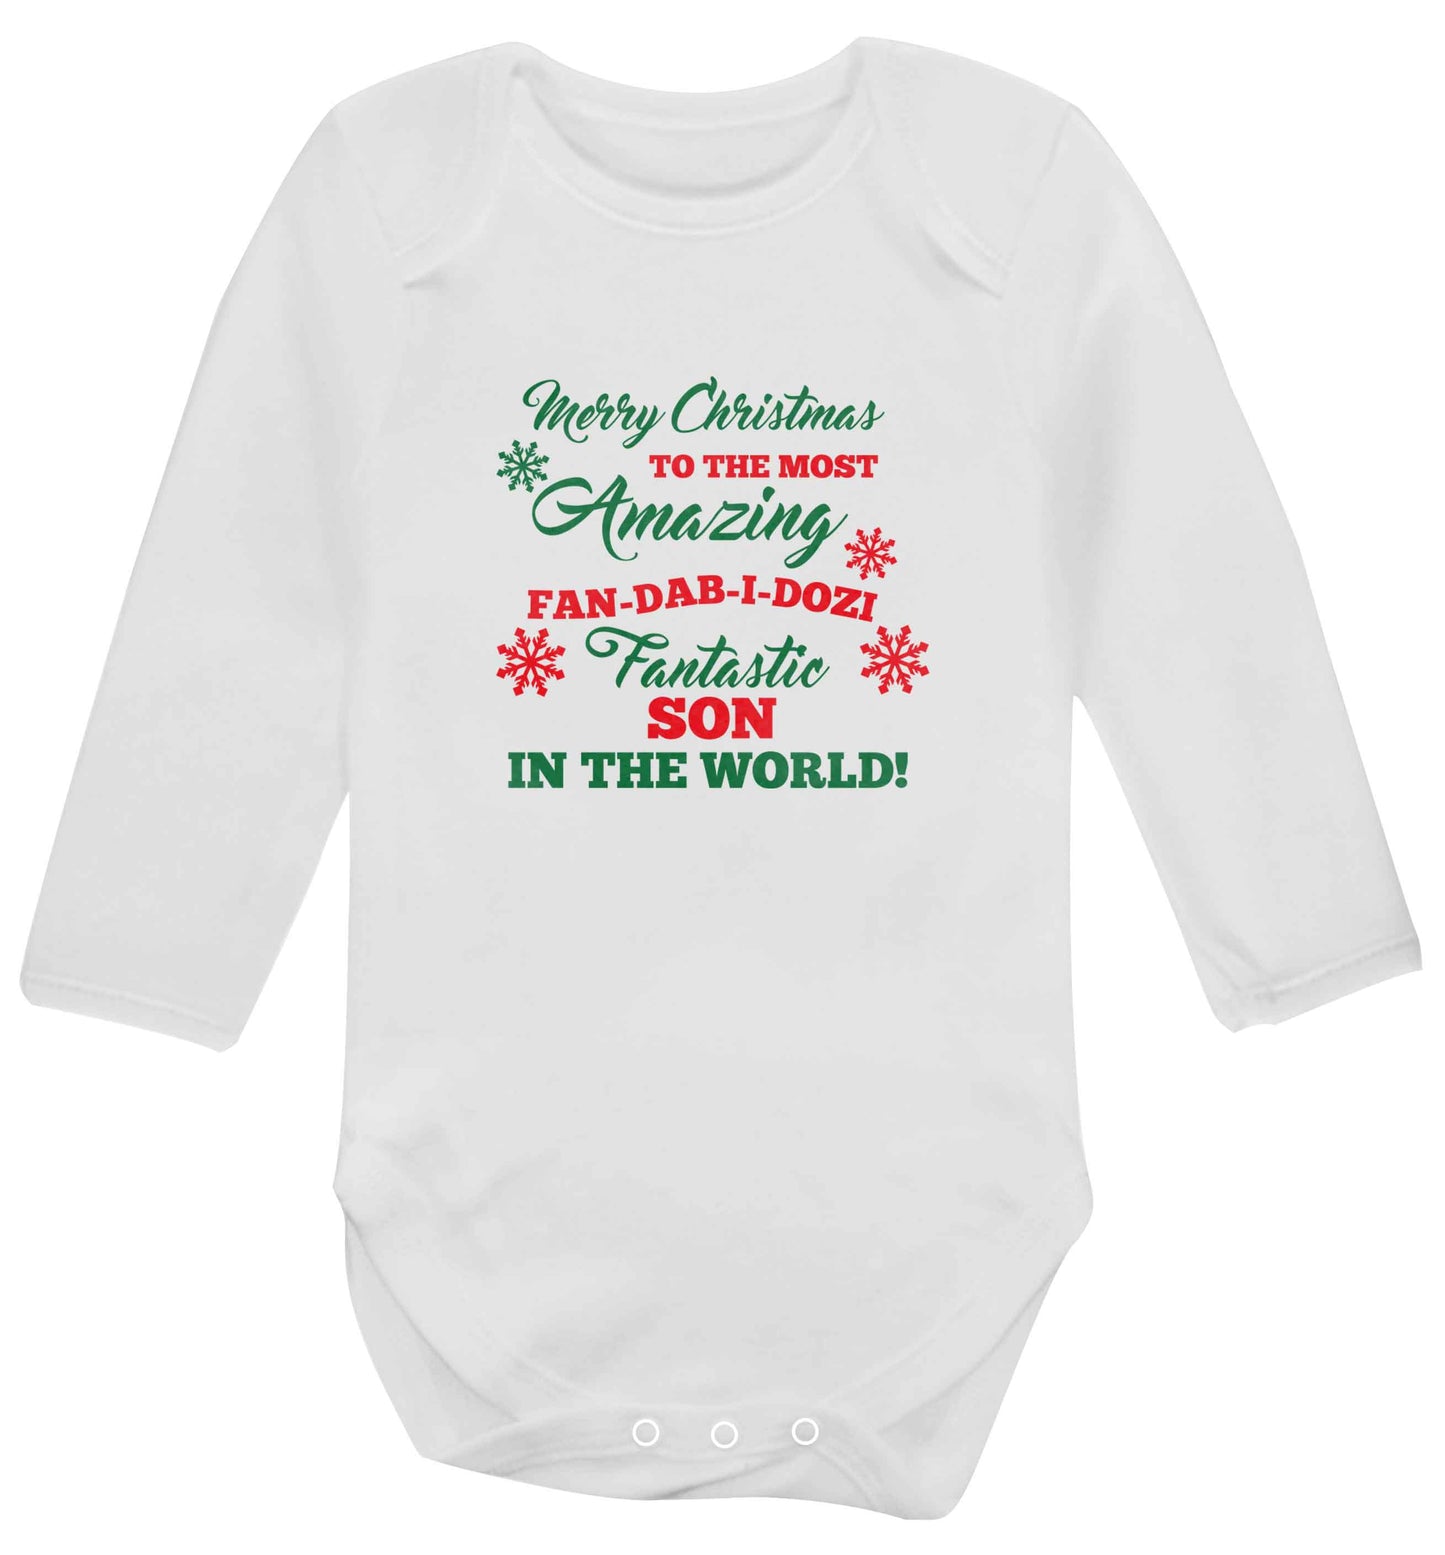 Merry Christmas to the most amazing fan-dab-i-dozi fantasic Son in the world baby vest long sleeved white 6-12 months